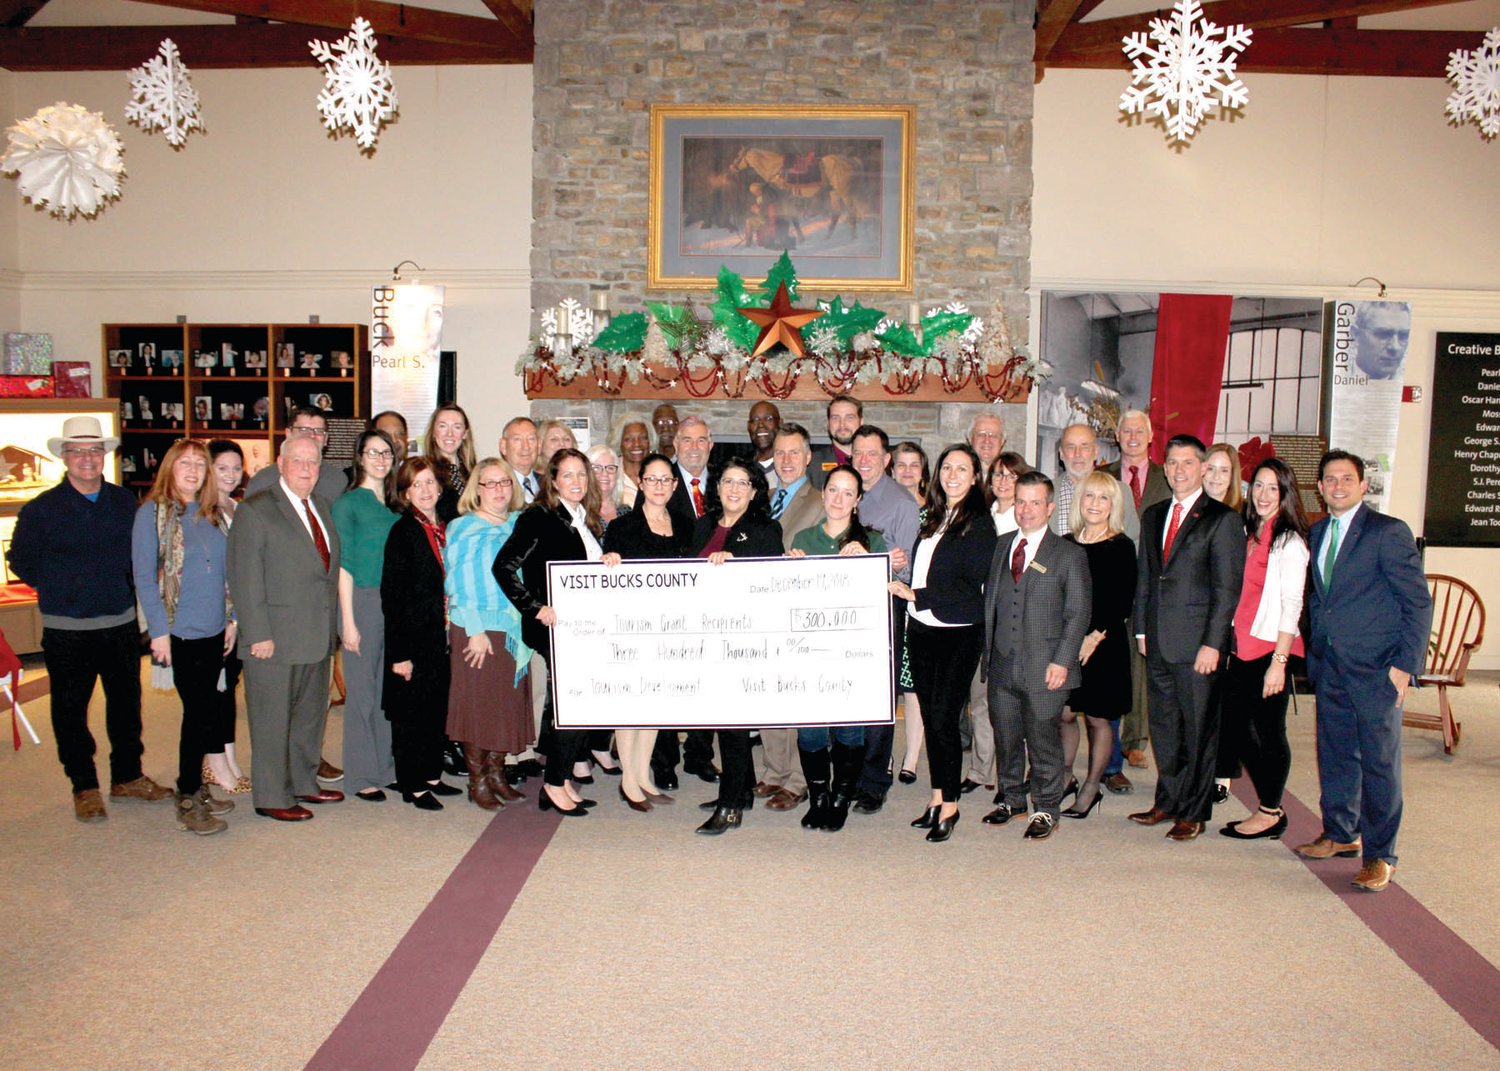 Representatives from organizations that received a total of $300,000 in grants from Visit Bucks County, along with officials, at the grant presentation.